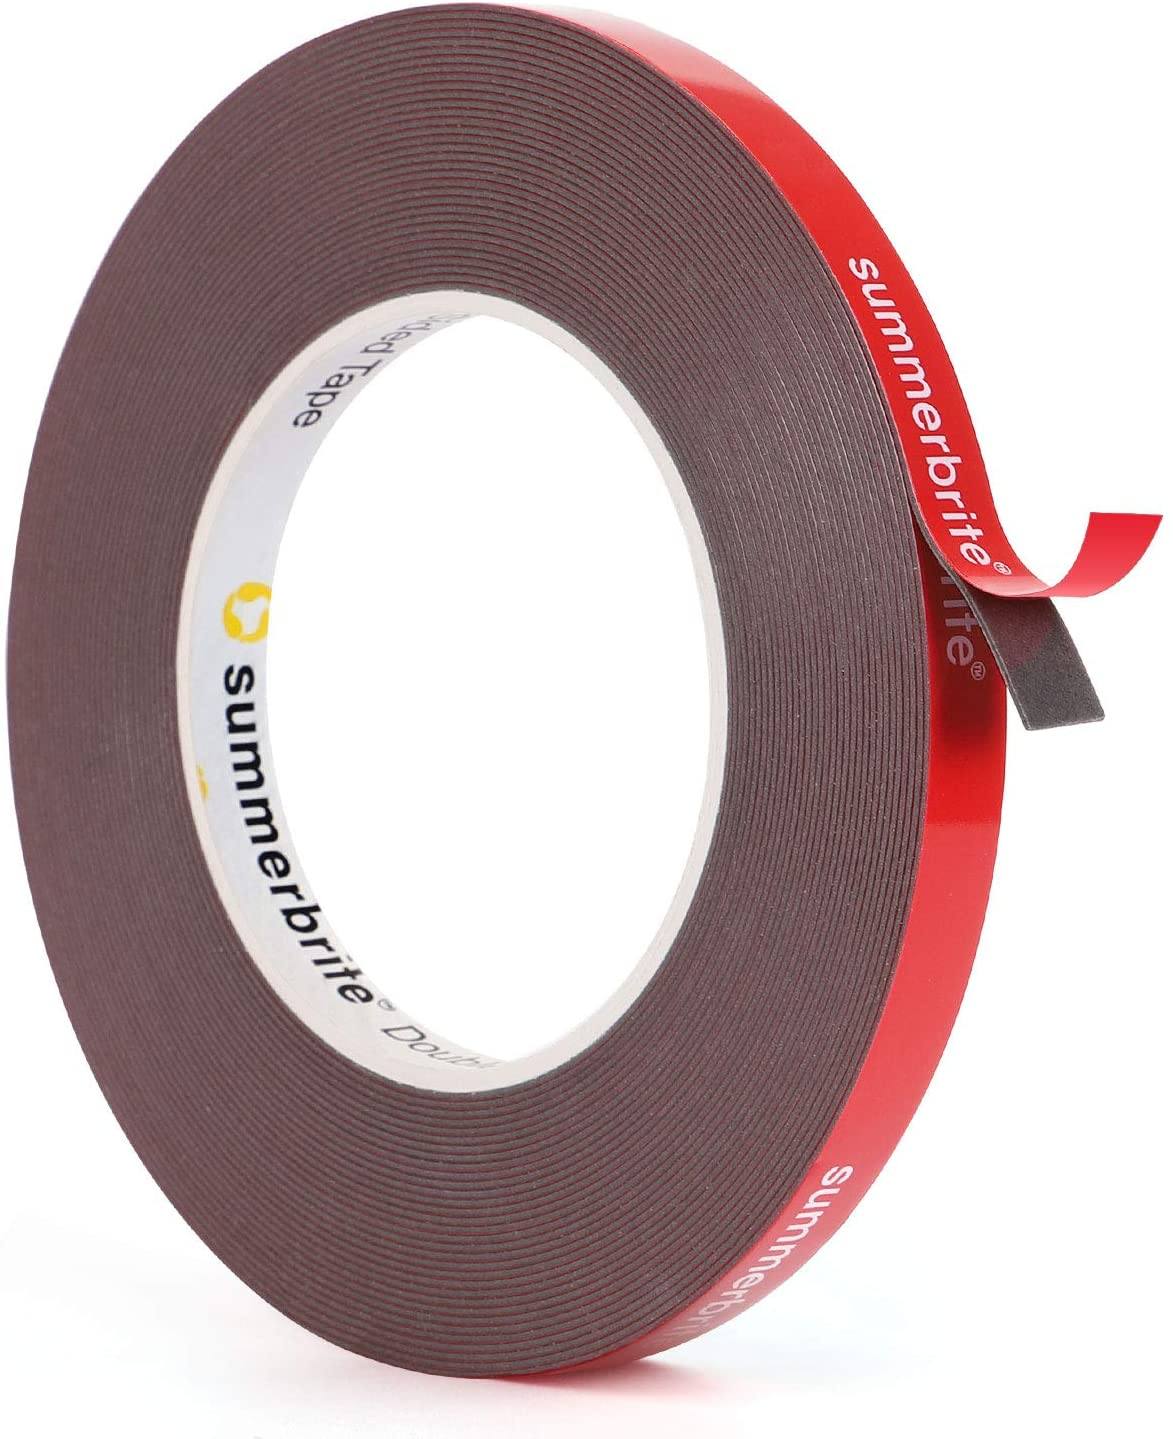 30mm X 3m 3m Vhb Double Sided Tape Super Strong High Temperature Gray Foam  Two Sided Adhesive For Car/home Decor